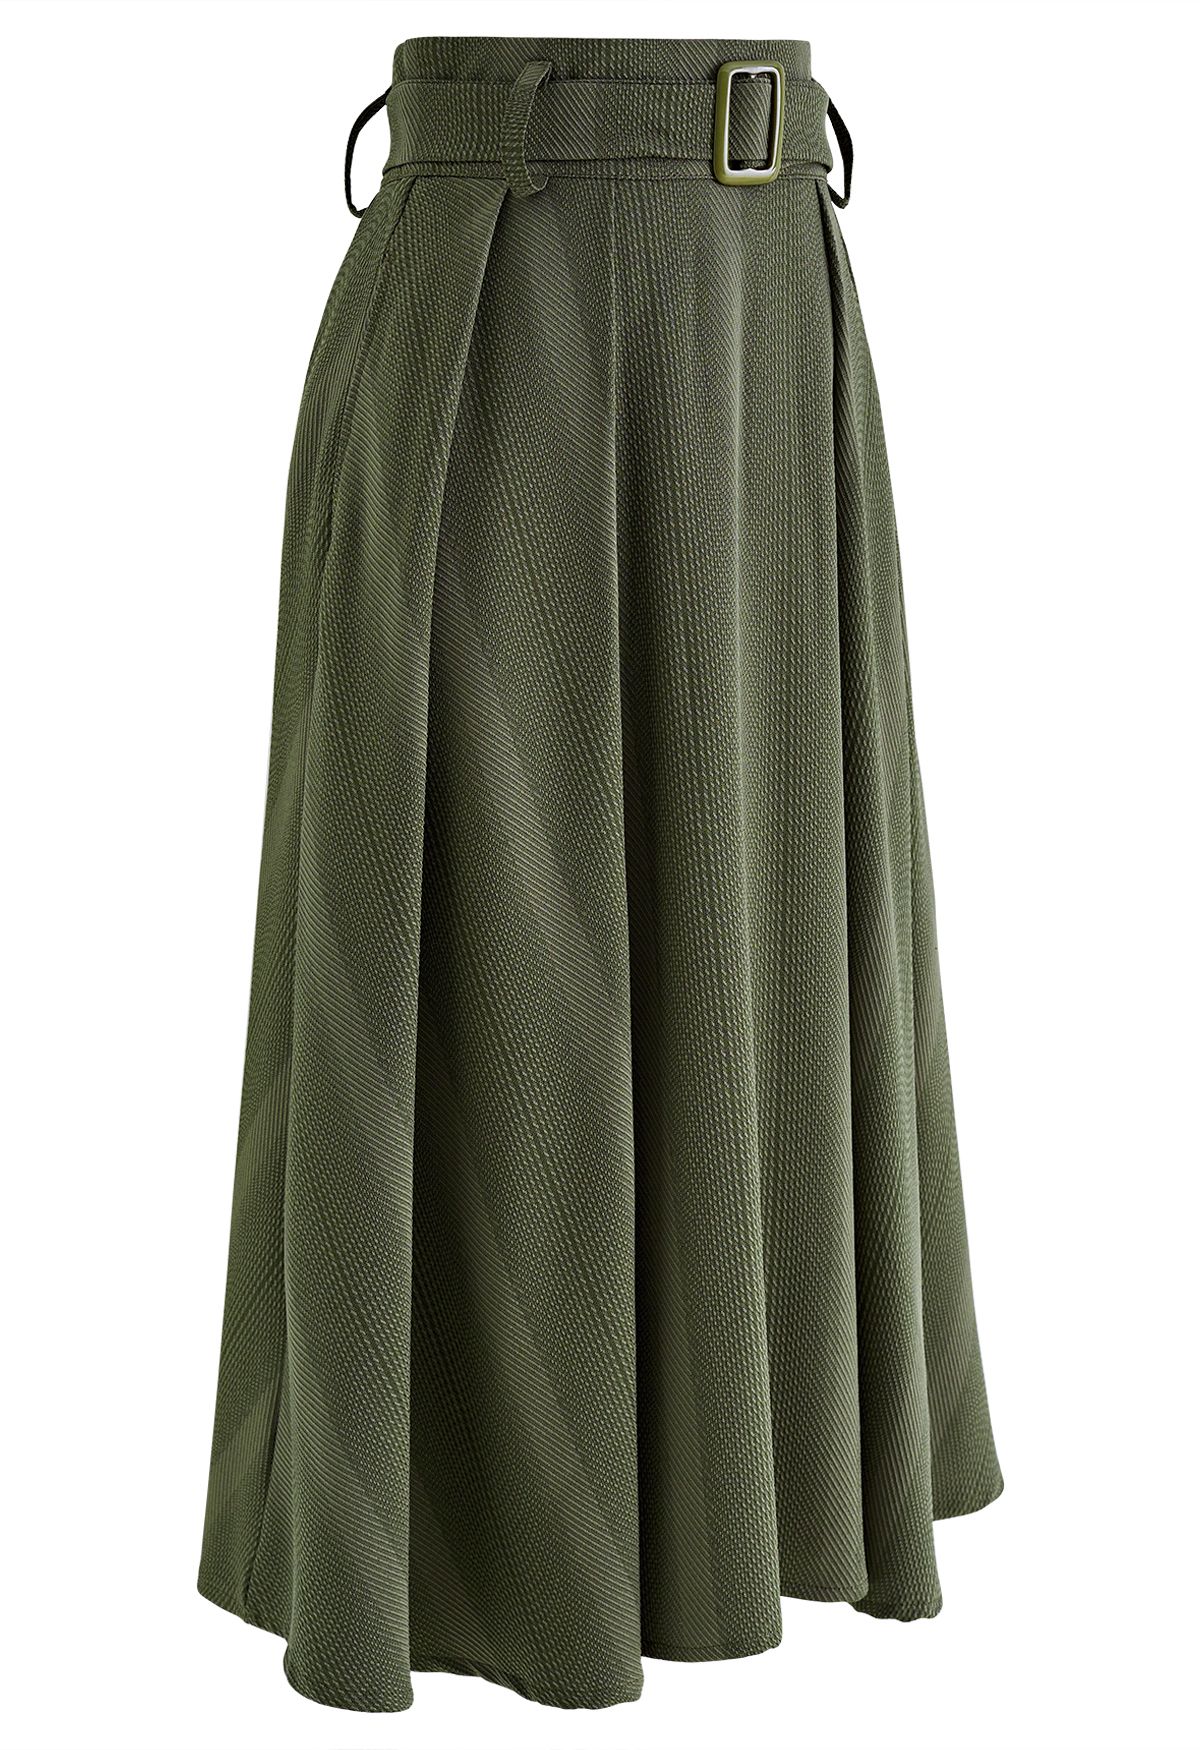 Belted Texture Flare Midi Skirt in Olive